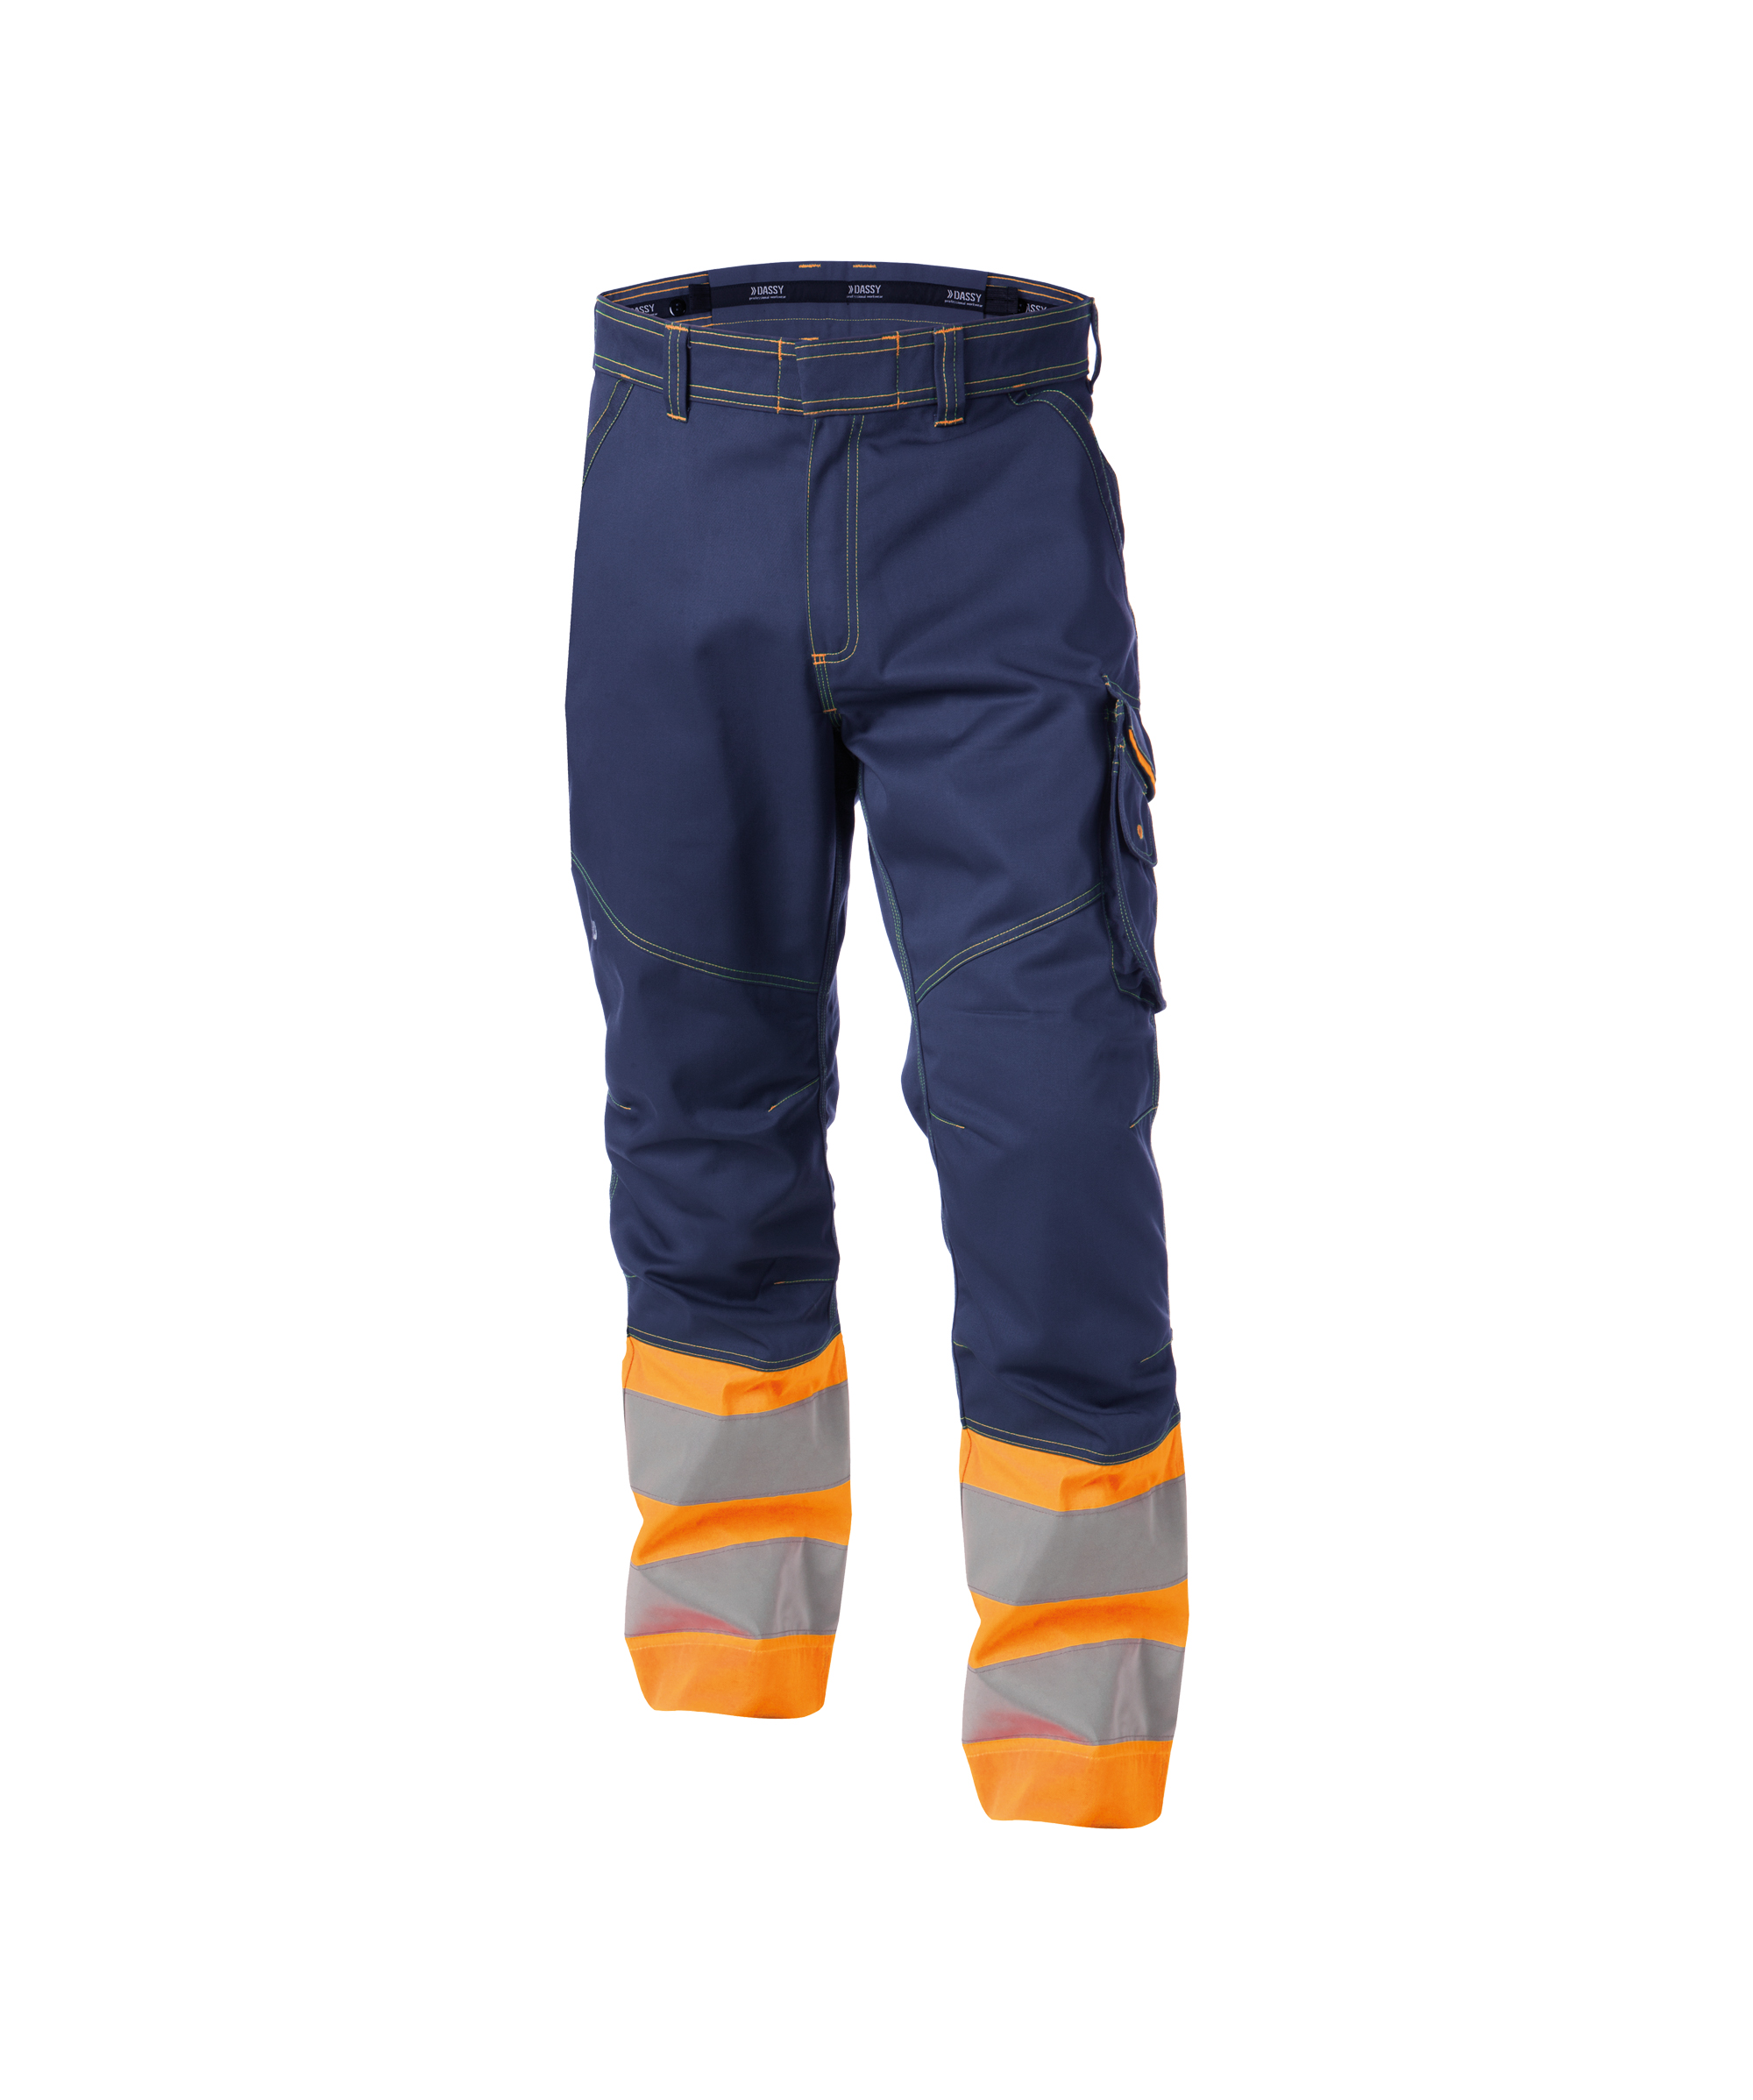 phoenix_high-visibility-work-trousers_navy-fluo-orange_front.jpg